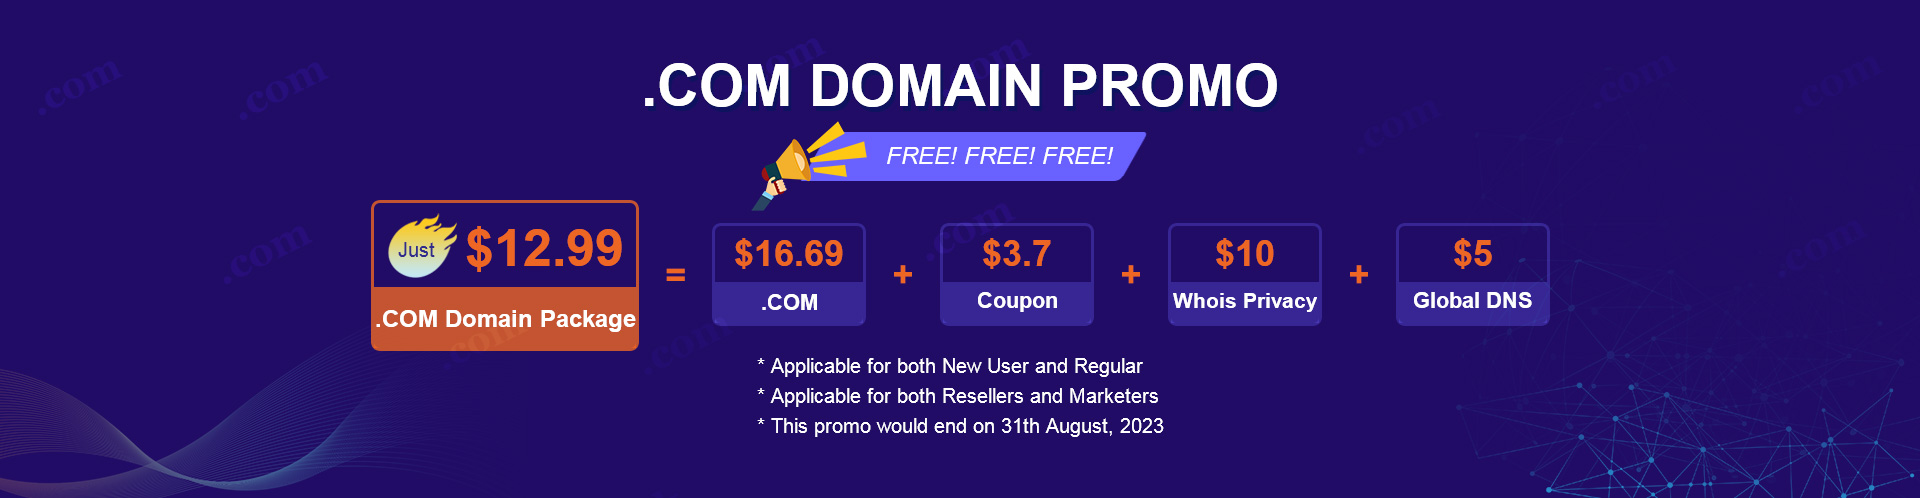 Limited Time Offer: Grab Your Exclusive .com Domain at Unbeatable Discount | NiceNIC.NET